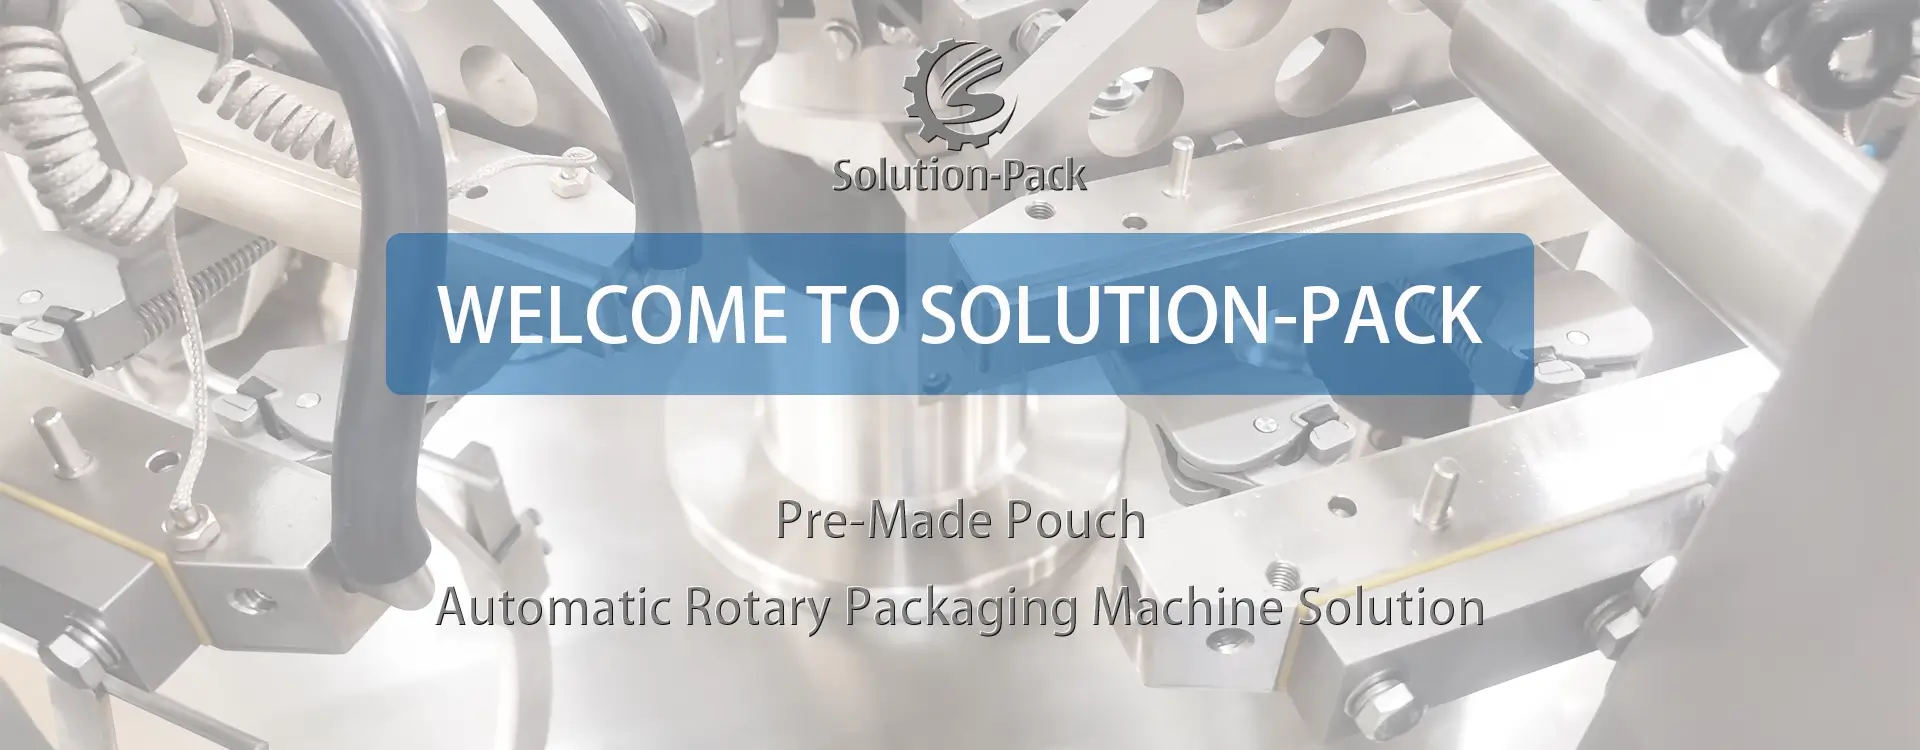 Model SP8-240Y Automatic Liquid Pre-Made Pouch Rotary Packaging Machine Solution Middle Banner Picture | Solution-Pack